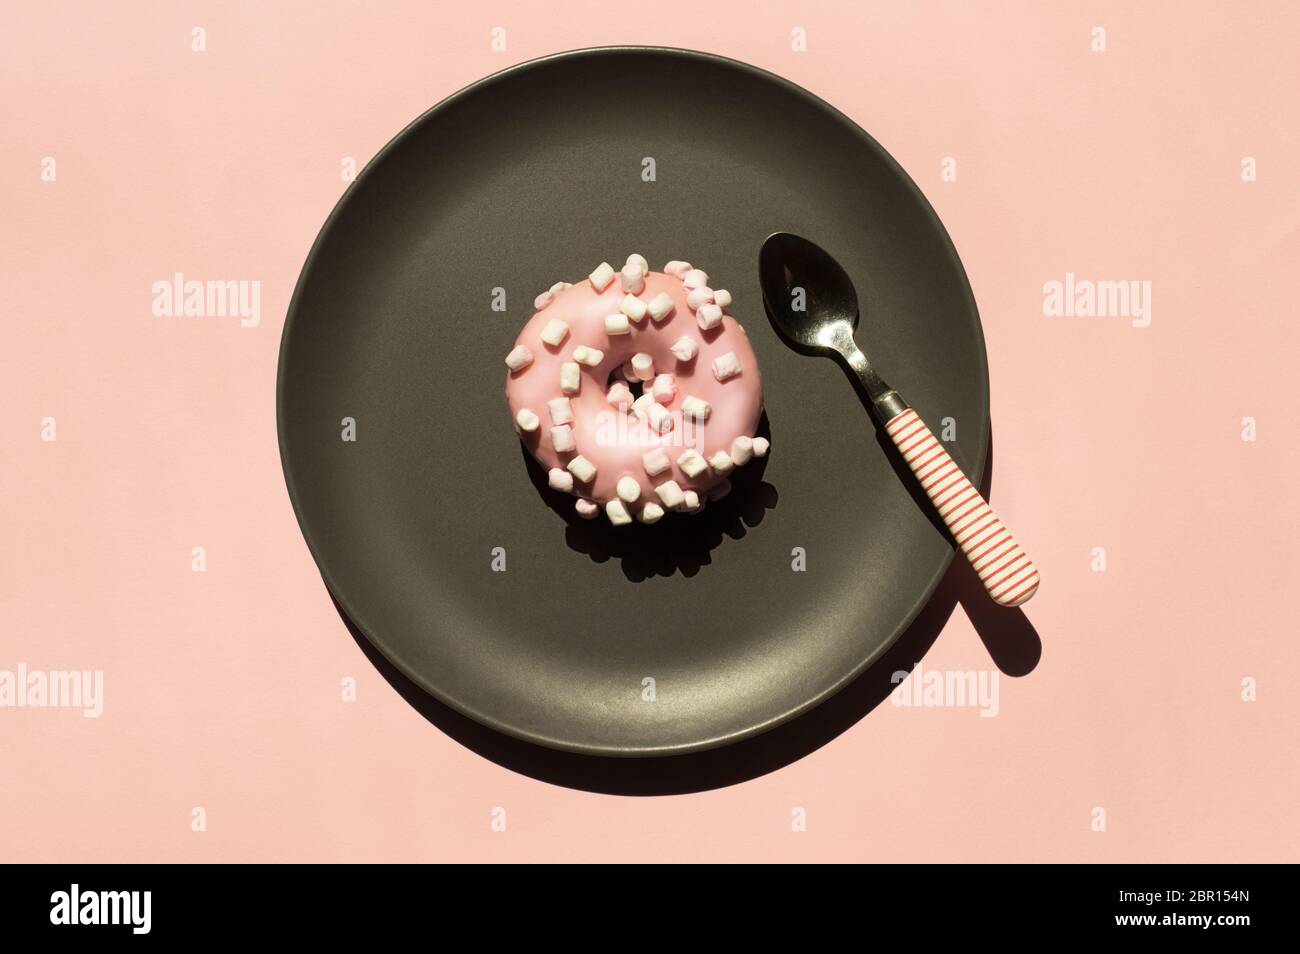 Pink donat decorated with white marshmallows on the grey ceramic plate near small stripped spoon on light coral background. Top view flat lay. Trendy Stock Photo